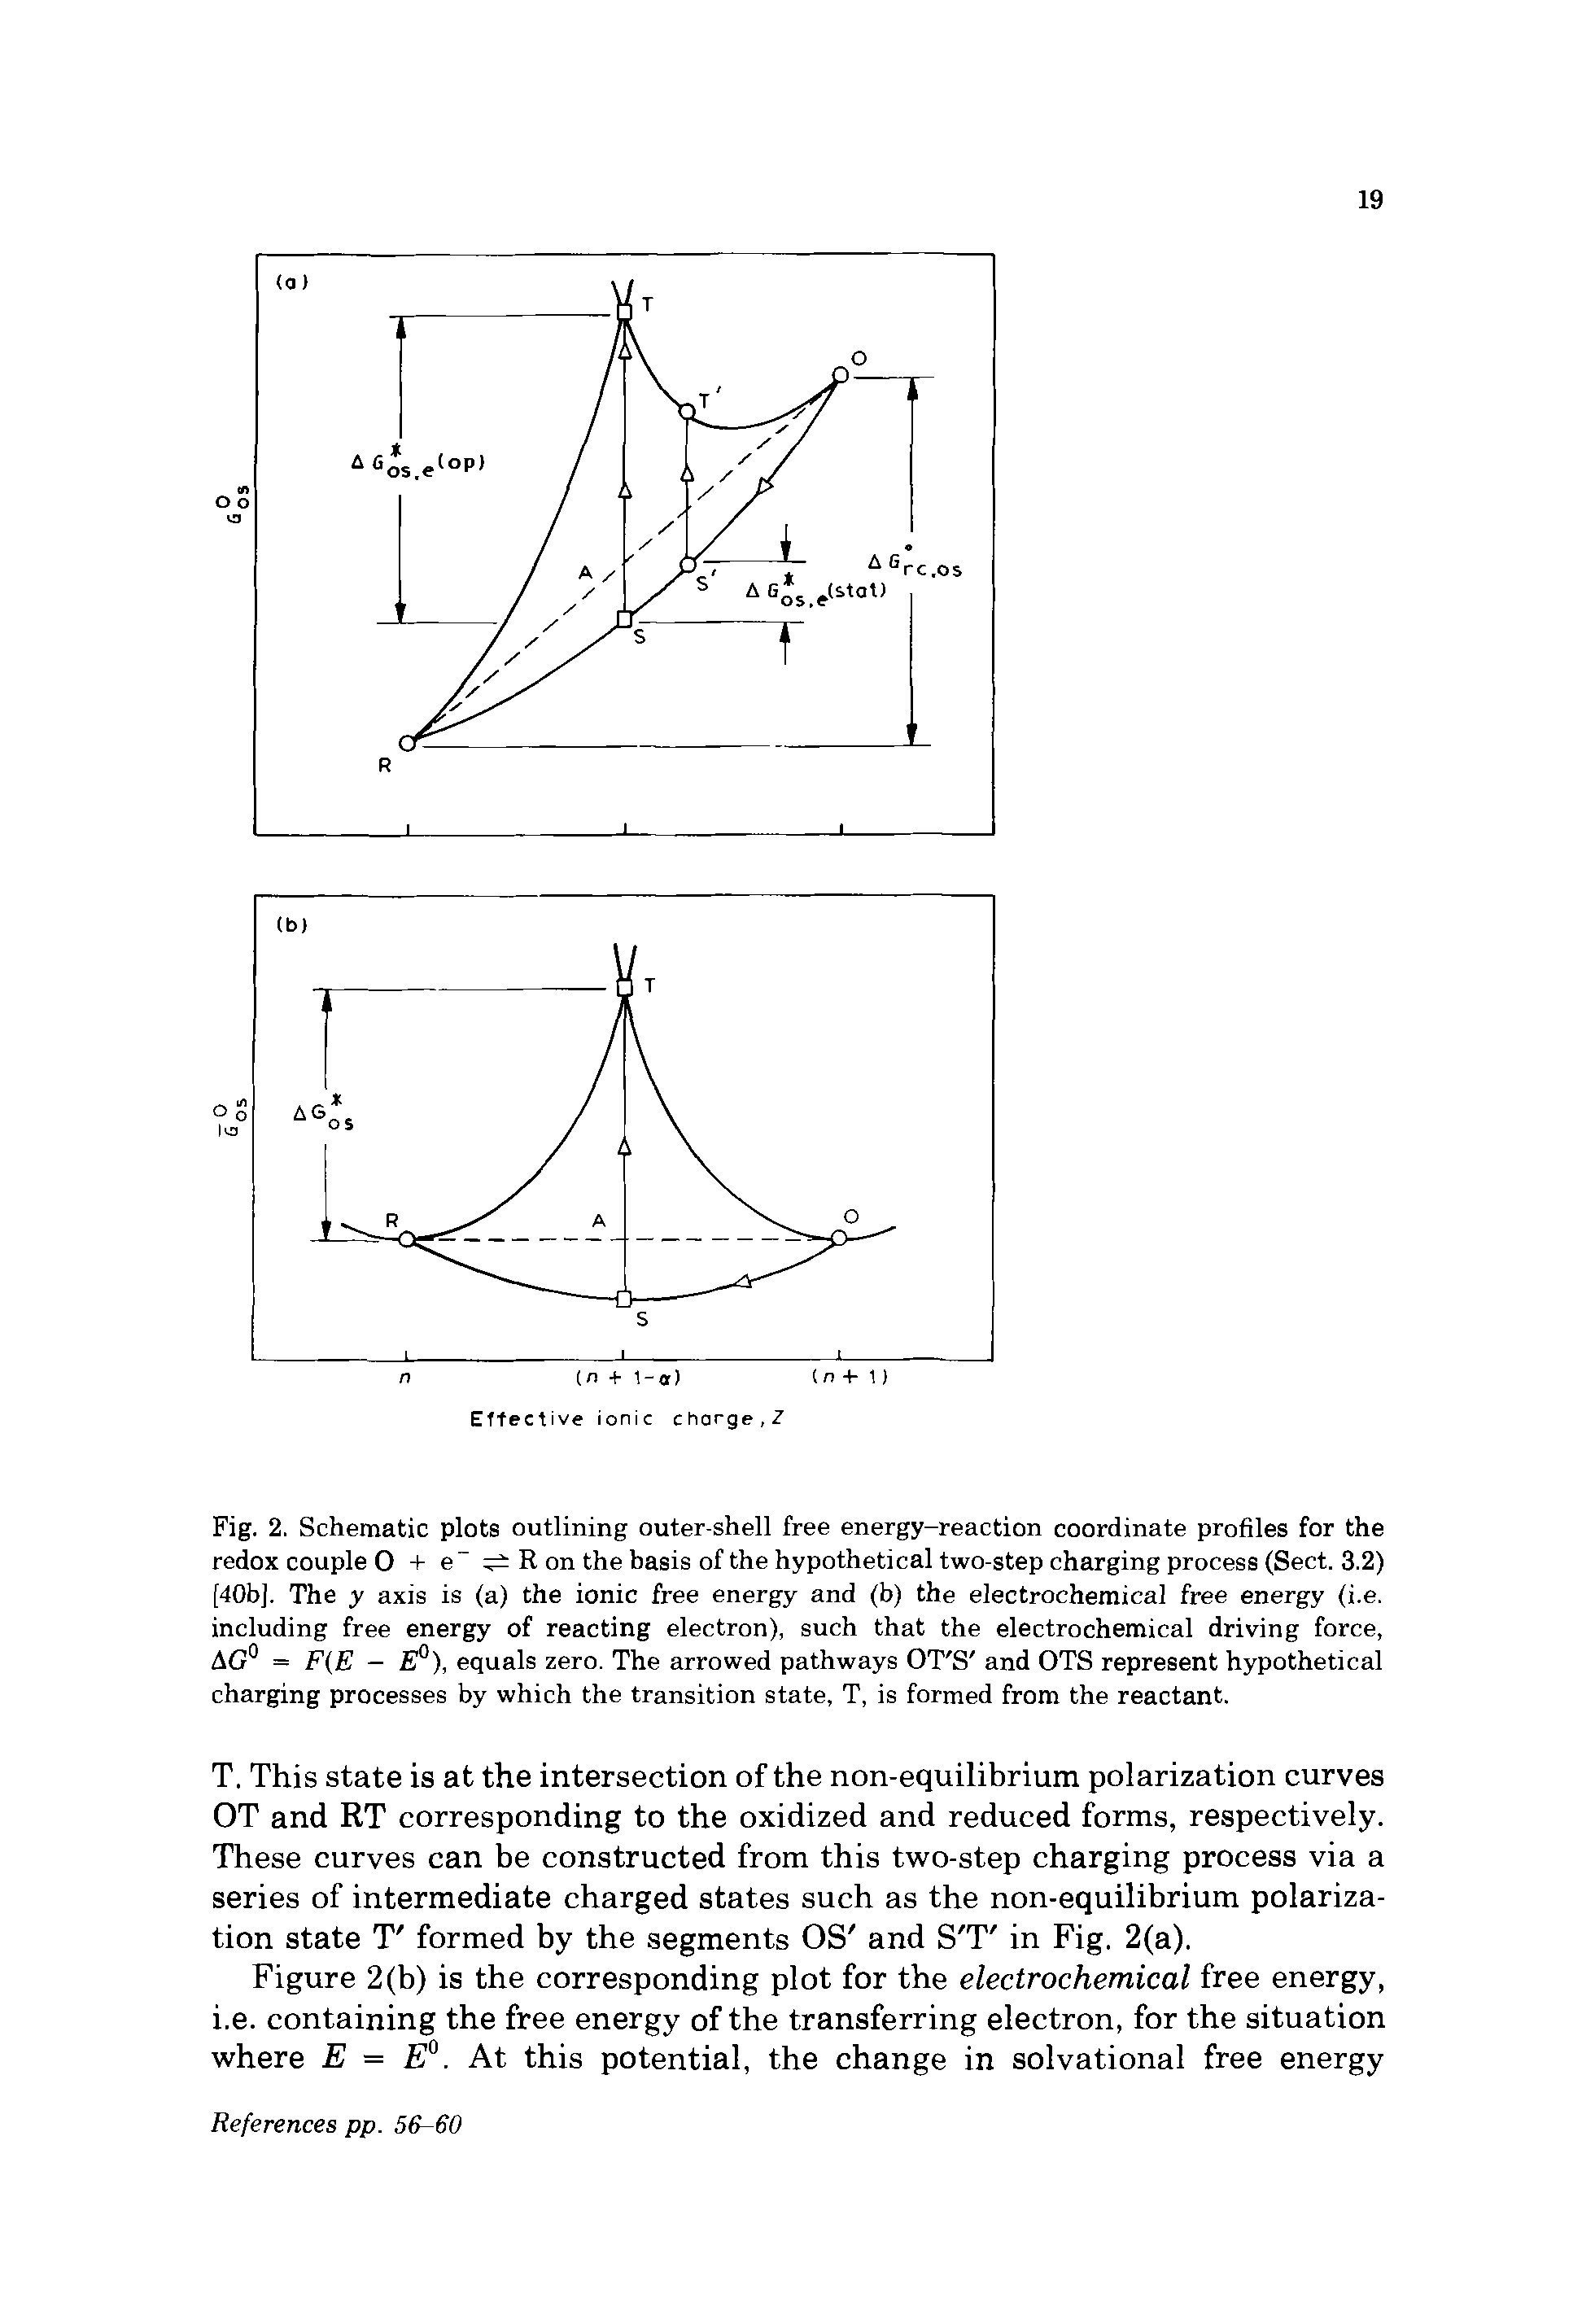 Fig. 2. Schematic plots outlining outer-shell free energy-reaction coordinate profiles for the redox couple O + e R on the basis of the hypothetical two-step charging process (Sect. 3.2) [40b]. The y axis is (a) the ionic free energy and (b) the electrochemical free energy (i.e. including free energy of reacting electron), such that the electrochemical driving force, AG° = F(E - E°), equals zero. The arrowed pathways OT S and OTS represent hypothetical charging processes by which the transition state, T, is formed from the reactant.